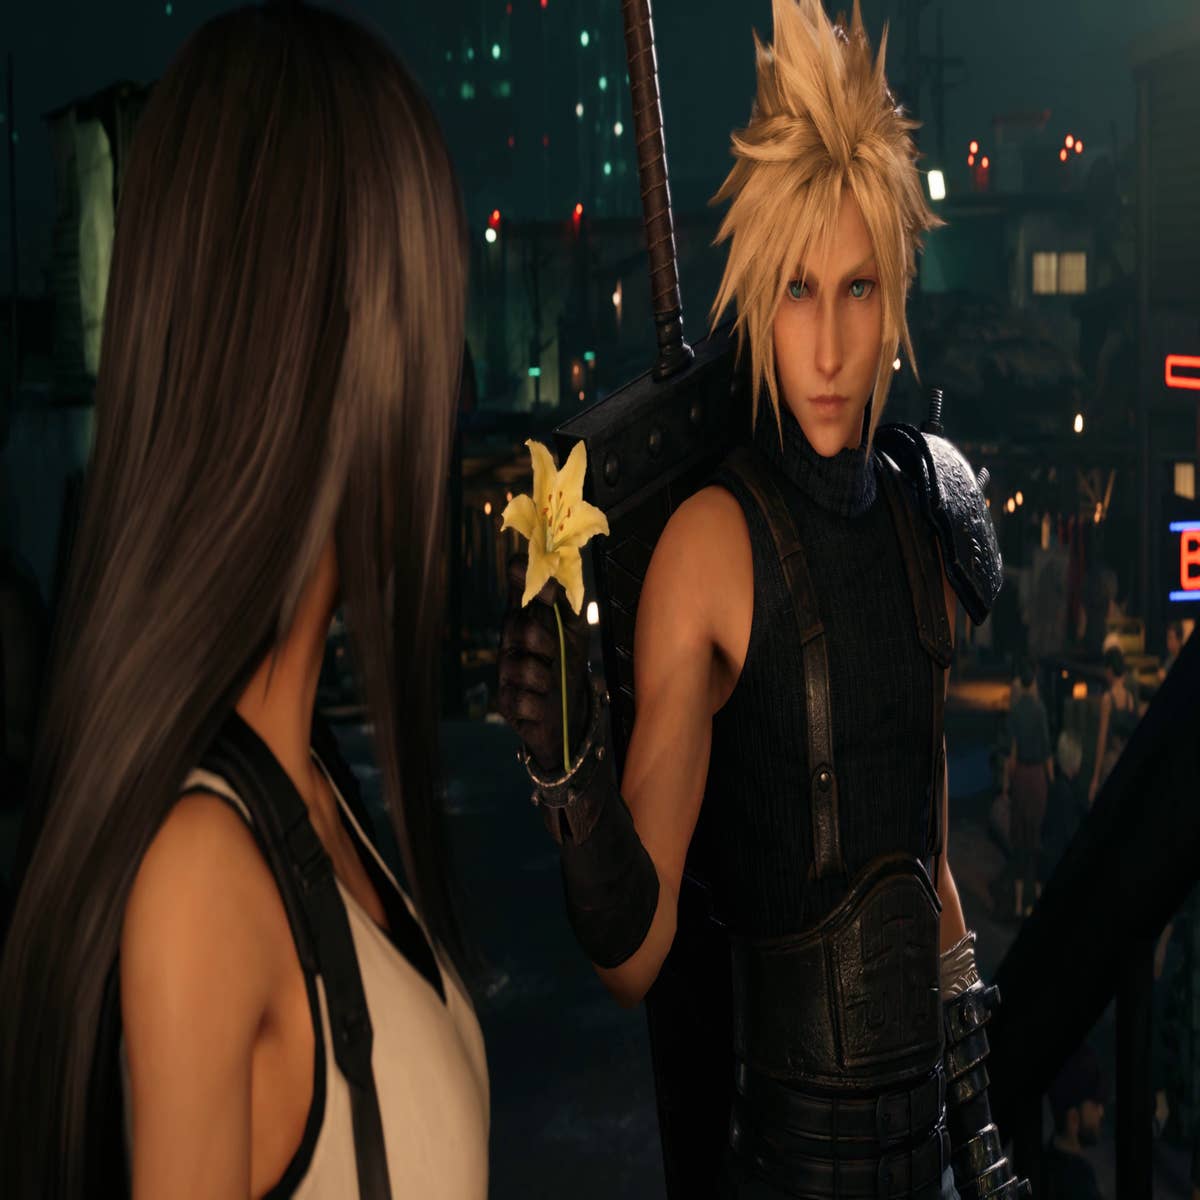 Final Fantasy 7 Remake review: The most daring Final Fantasy ever